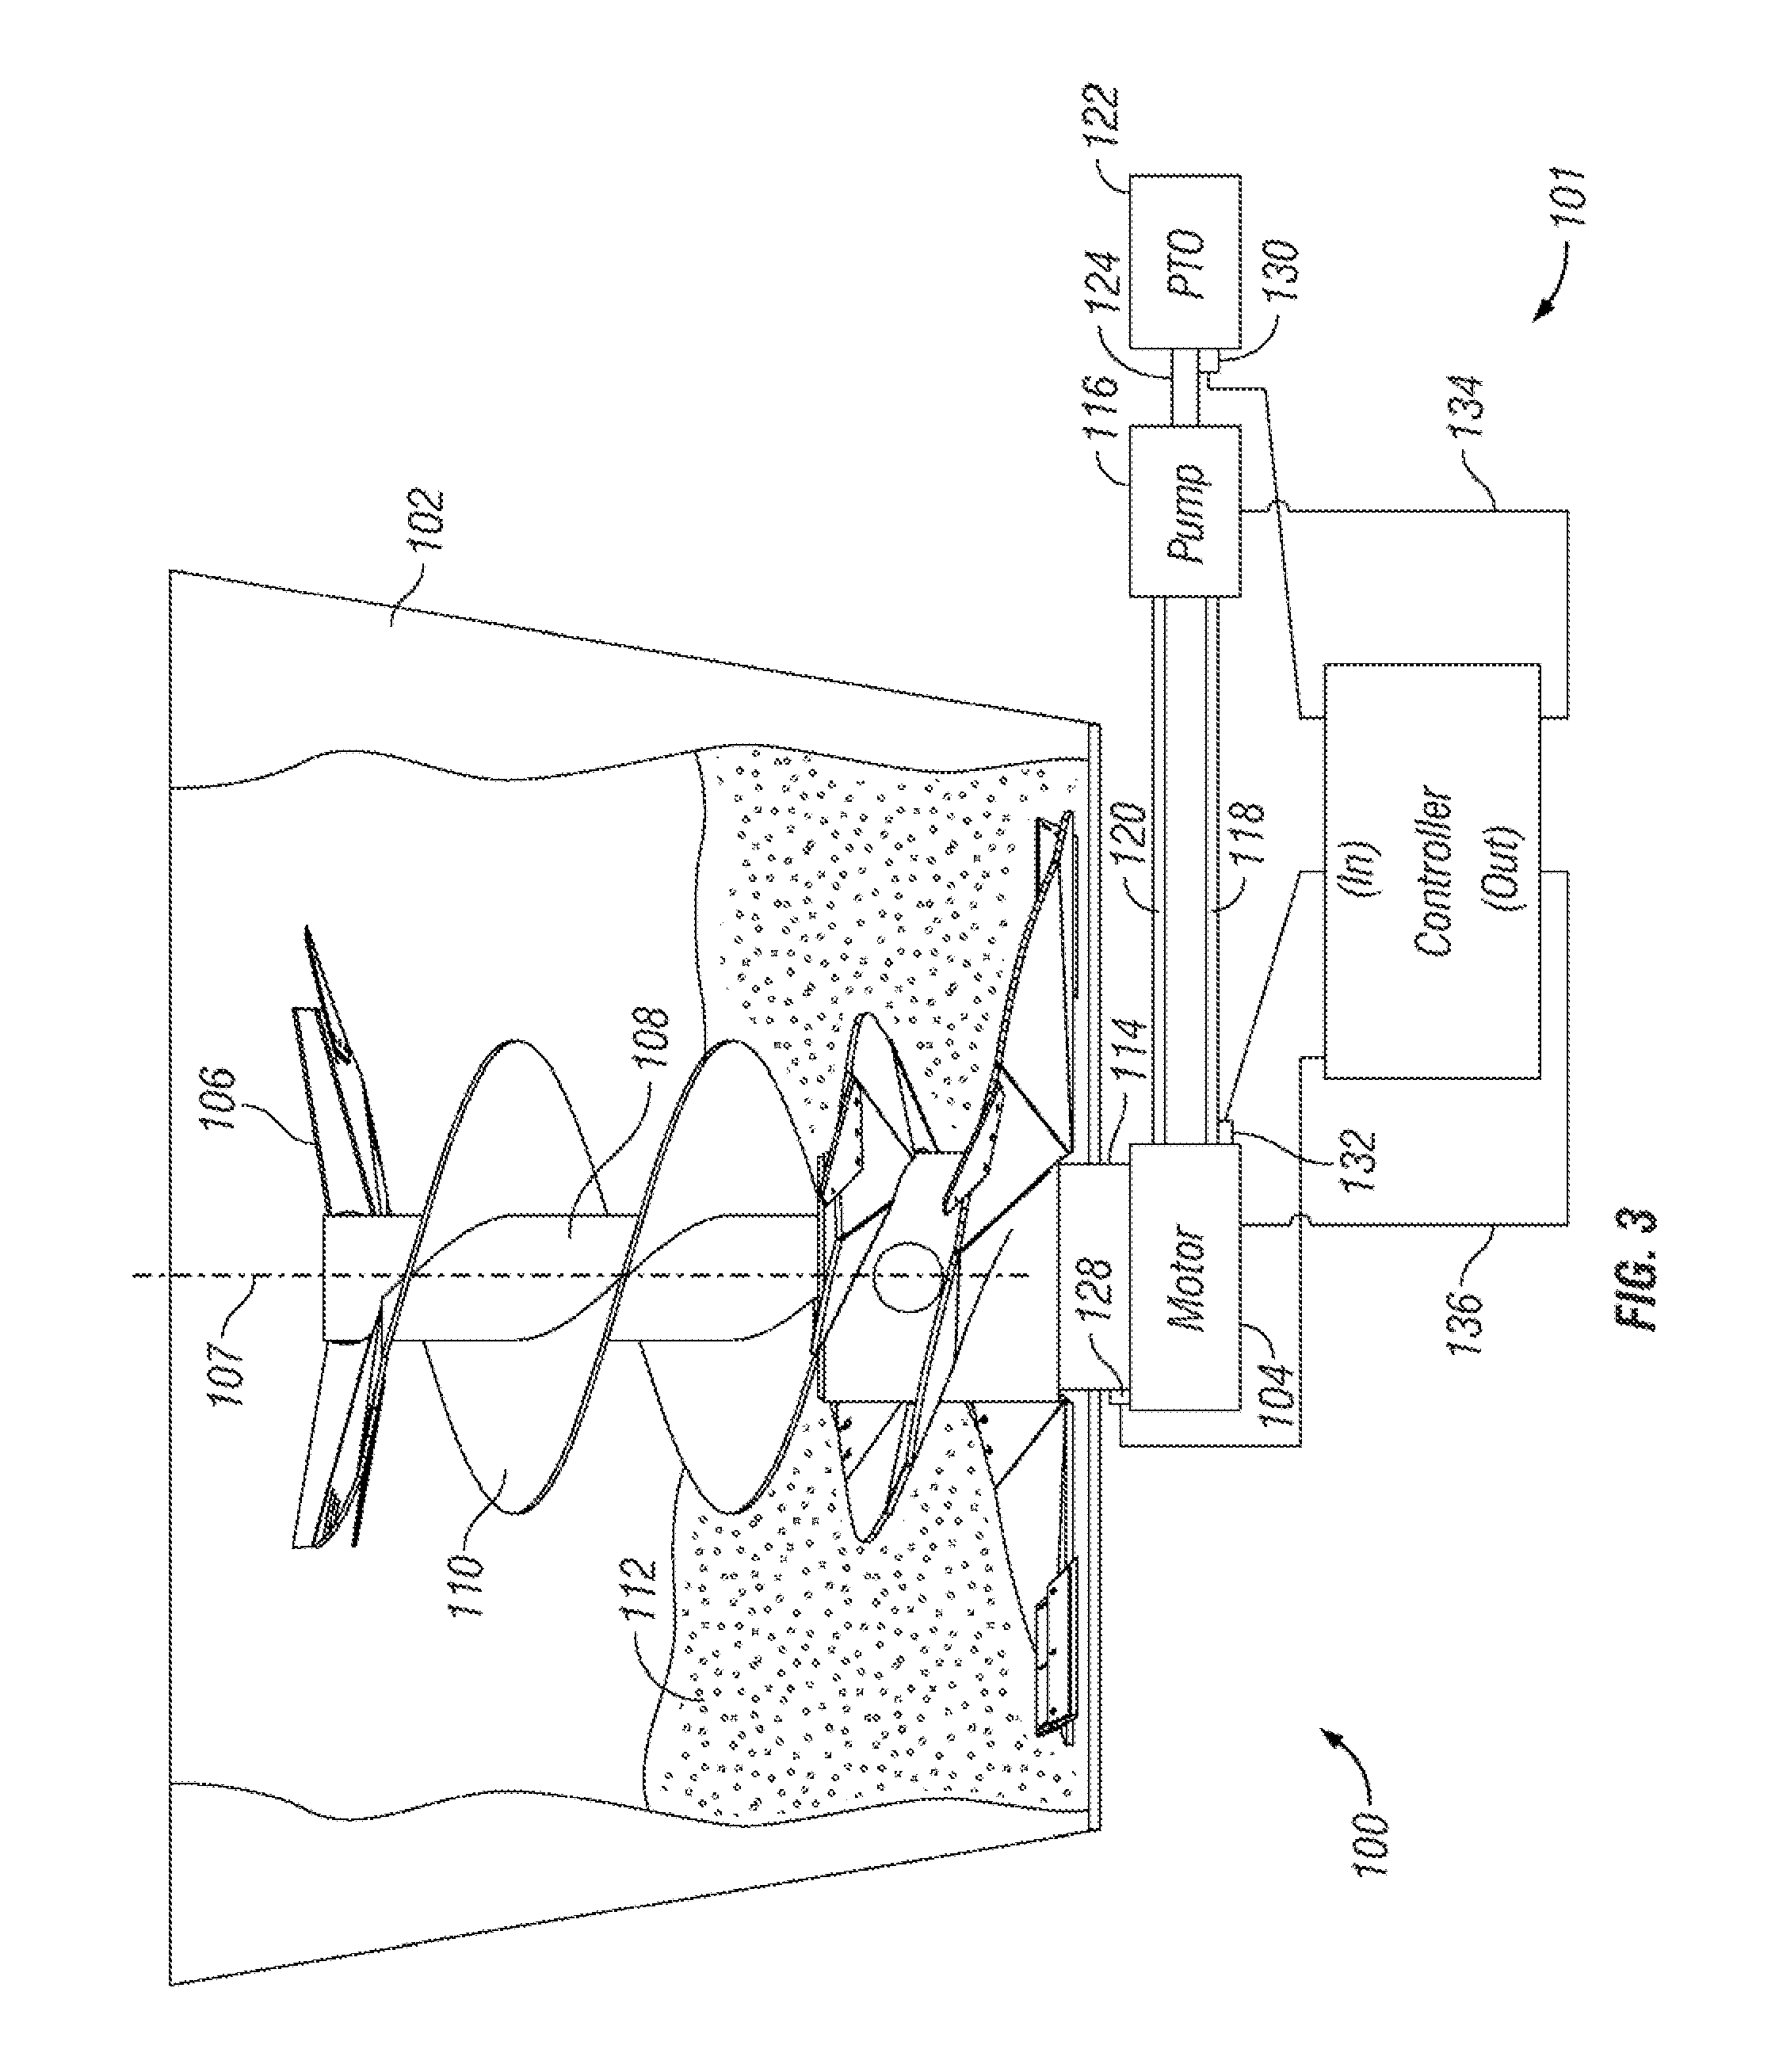 Agricultural mixer with drive system and method of using same